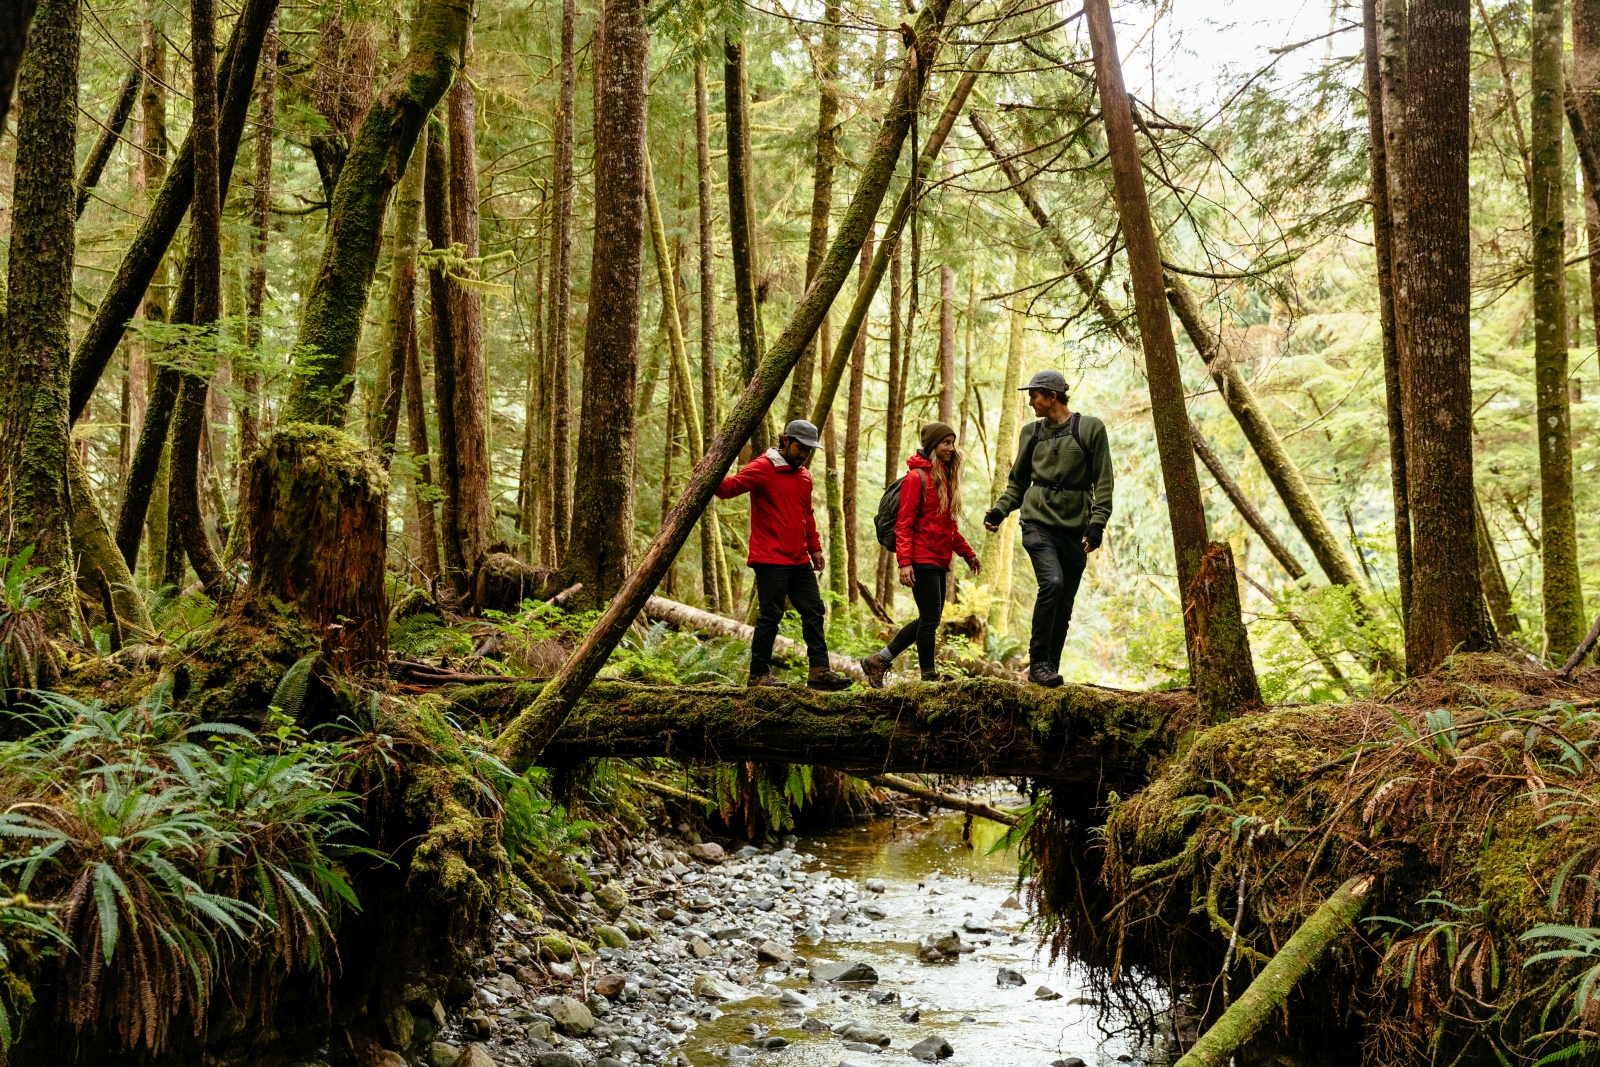 Three guests out on a hike through the lush green forest near luxury hotel Nimmo Bay in Canada